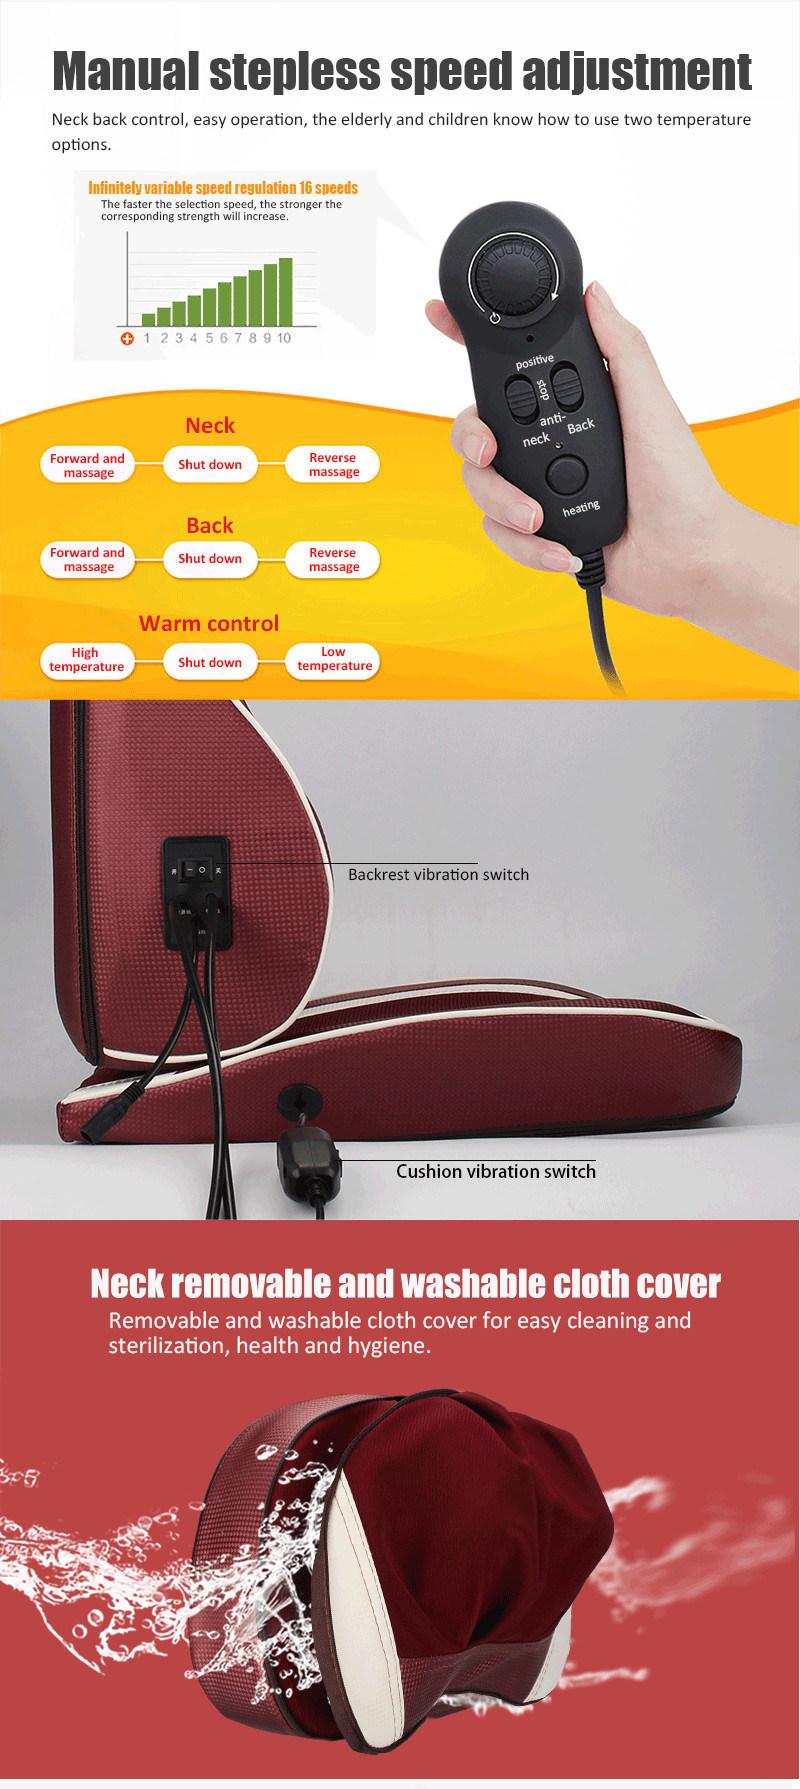 High Quality Massager Chair Full Back Massage Cushion Vibrating Heated Car Seat Cushion with 3 Intensity Levels